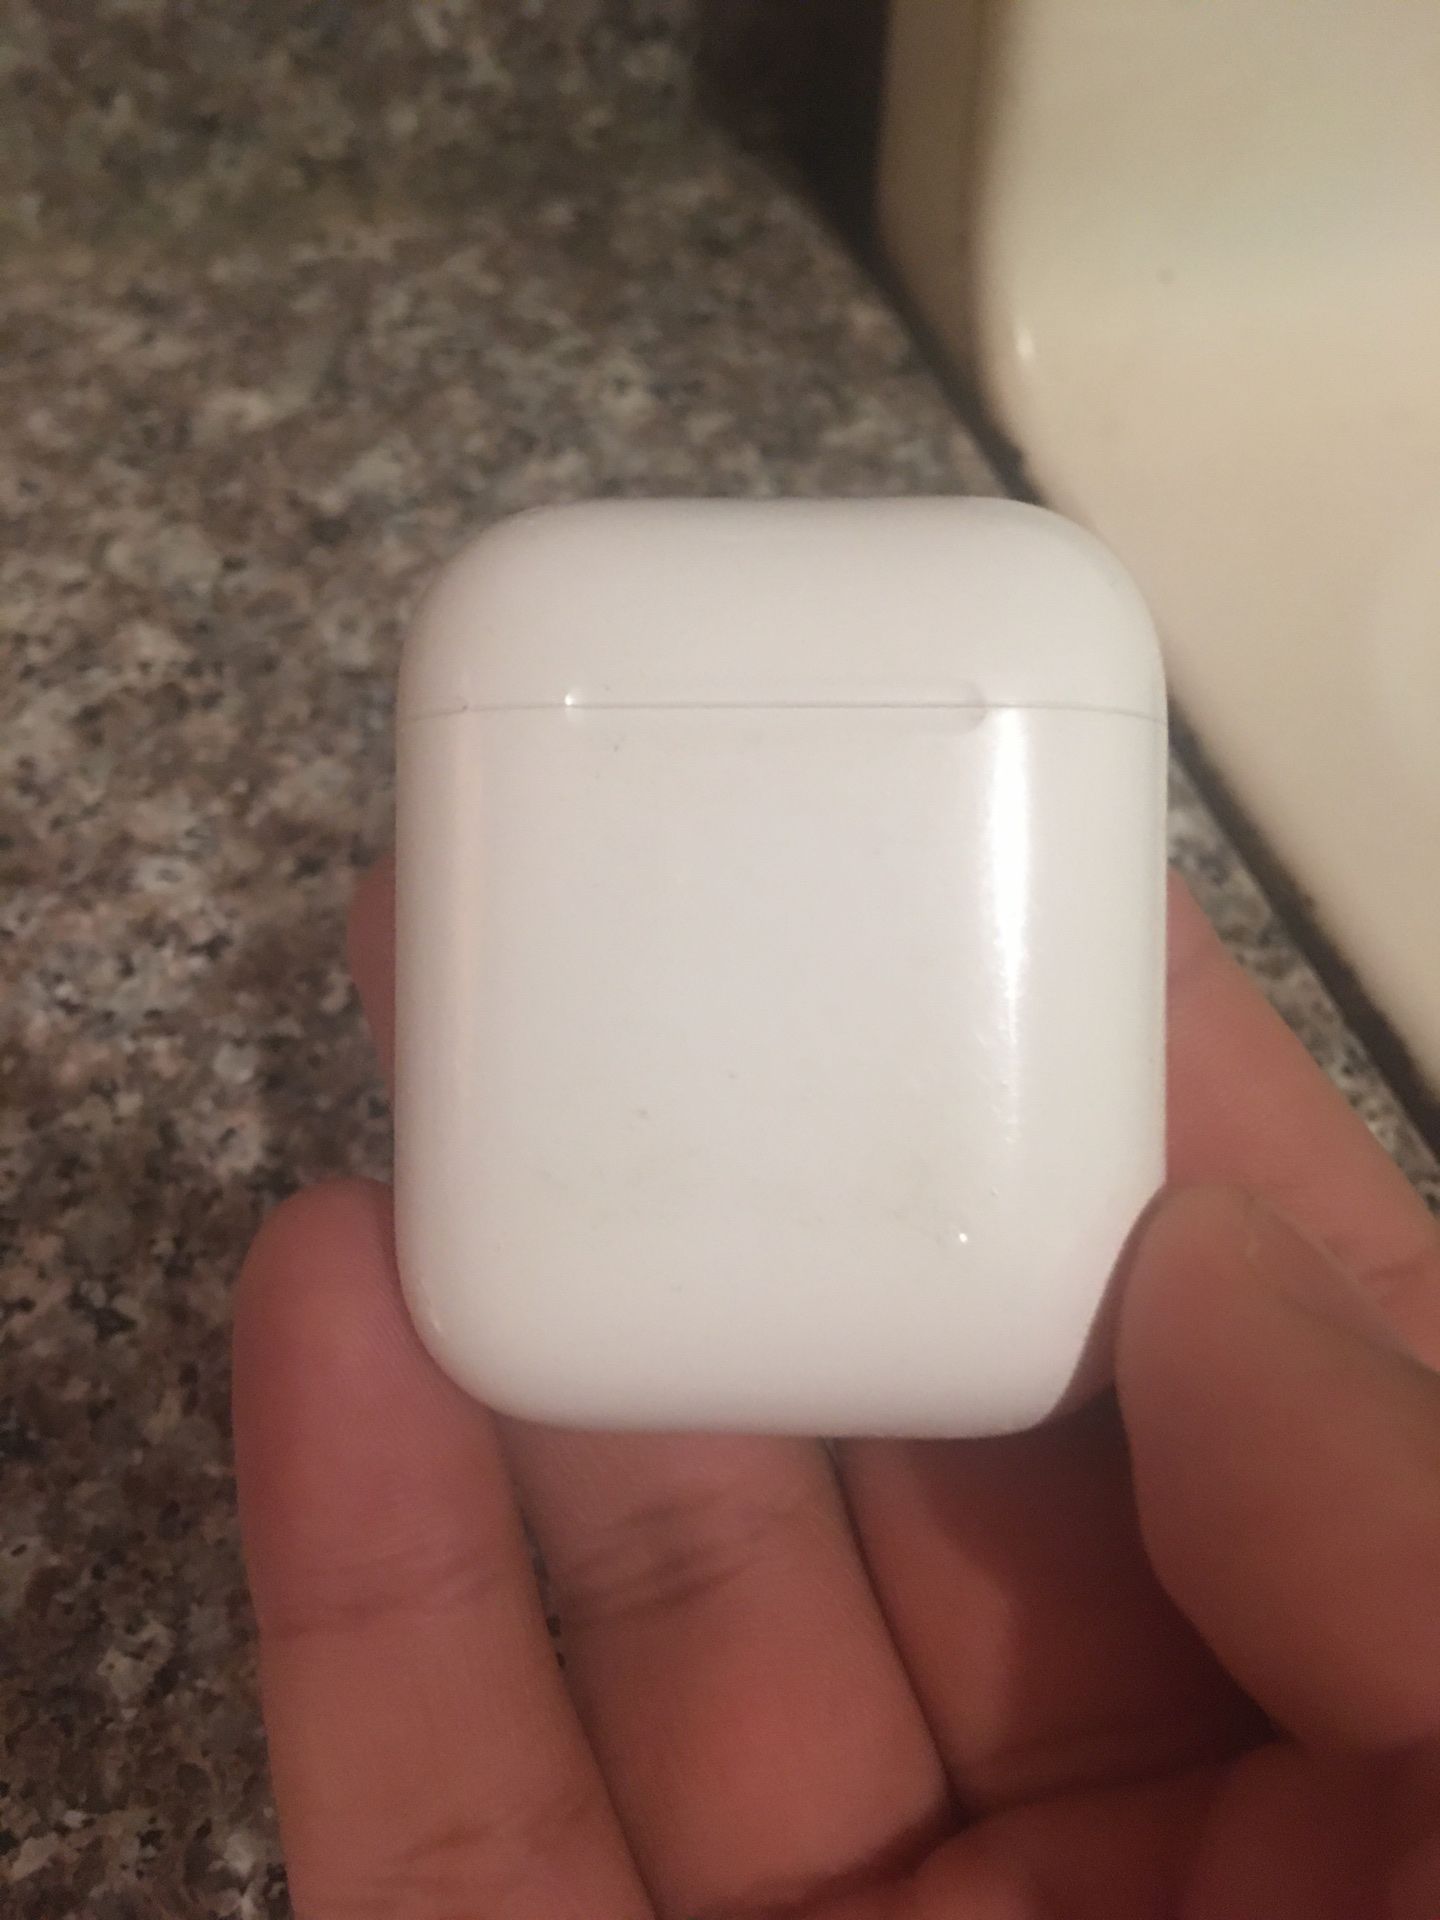 Airpods 1st generation